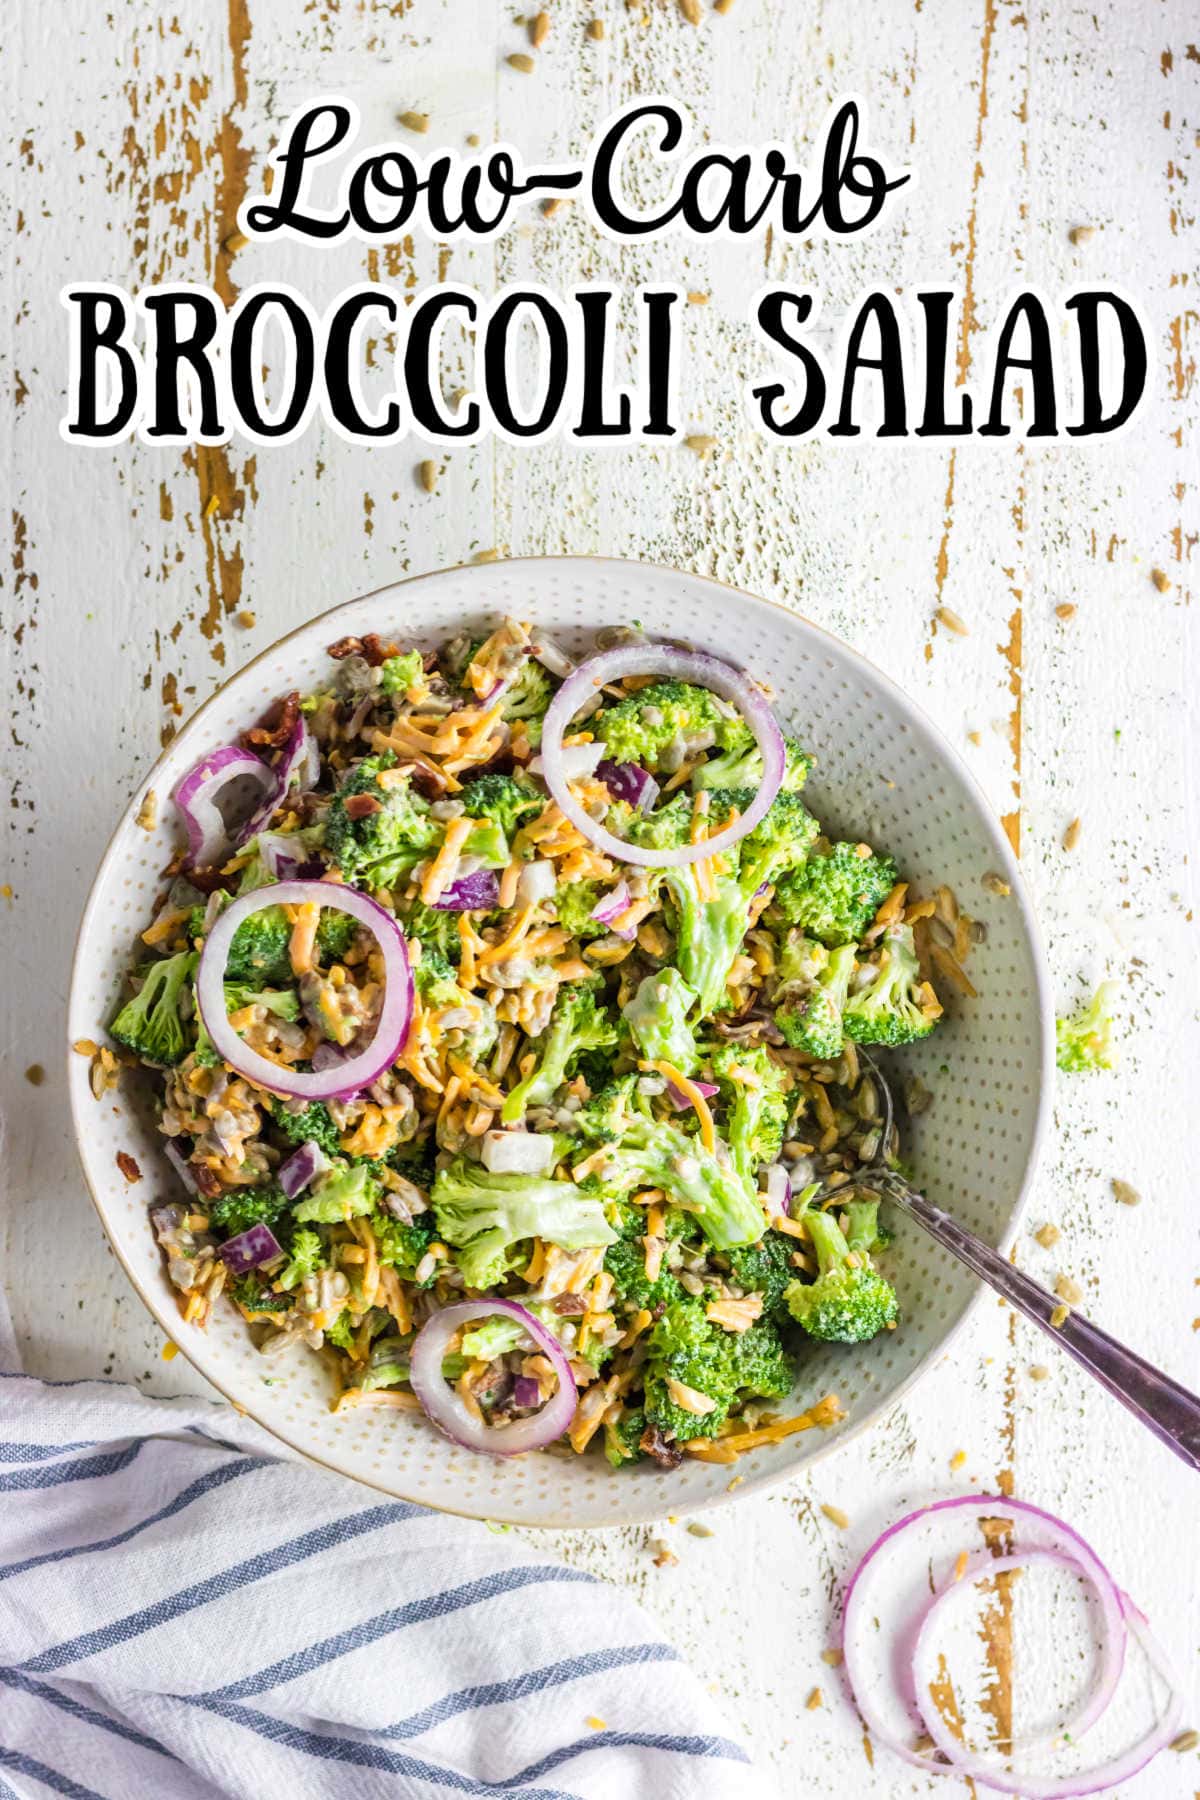 Overhead view of the broccoli salad in a bowl with a title text overlay.